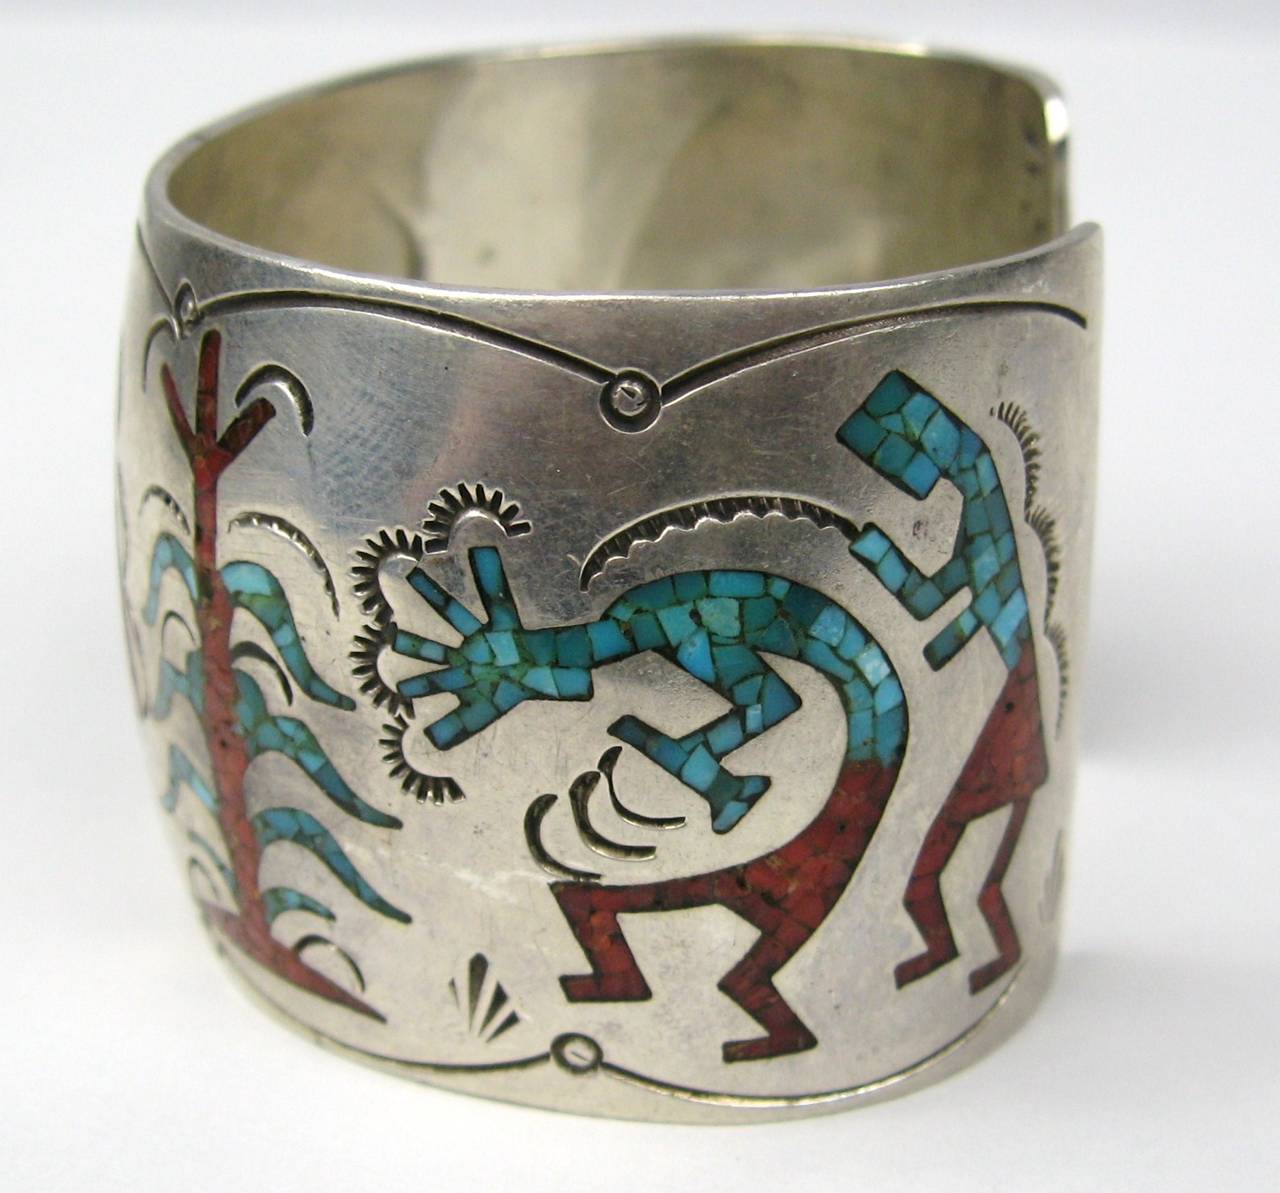 Cabochon Sterling Silver Inlaid Coral & Turquoise Zuni Story Teller Cuff Bracelet